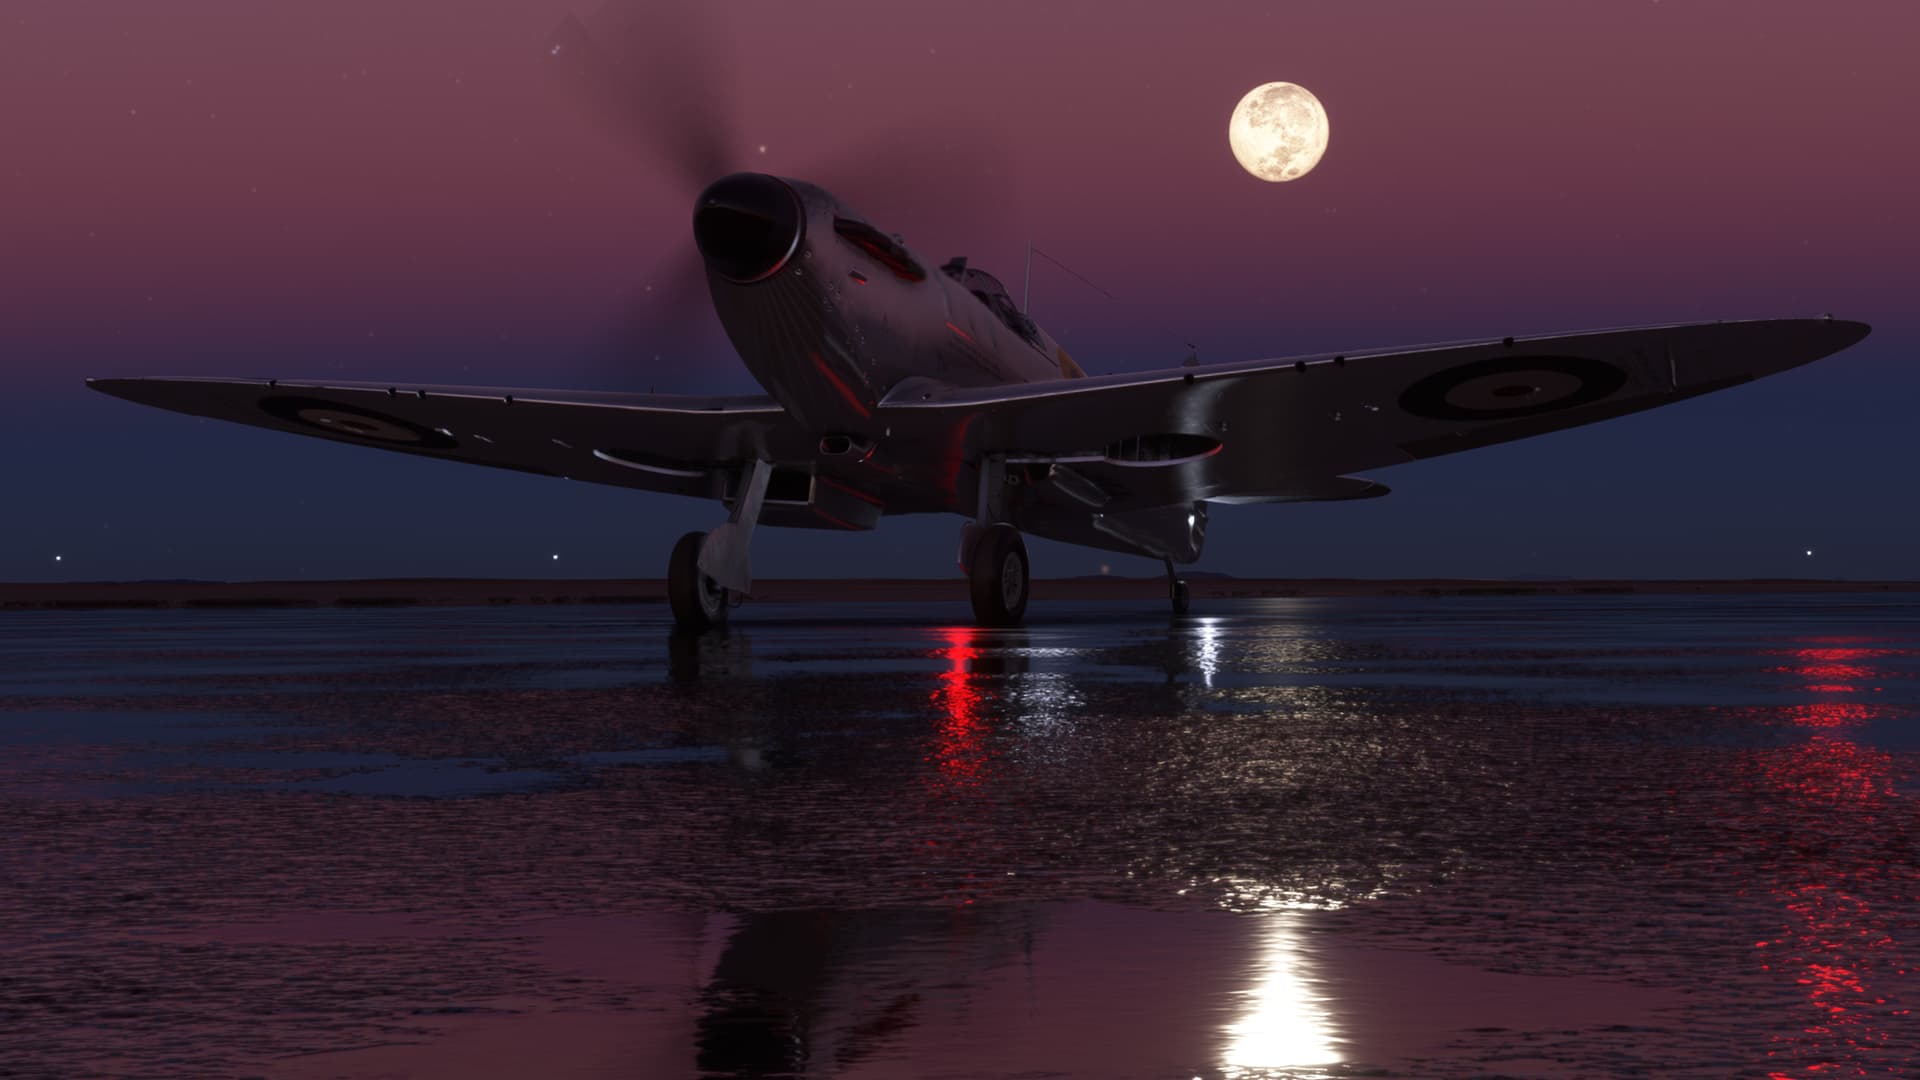 A Supermarine Spitfire parked on the ground at night. A Full moon is visible above the plane. The moon and parts of the aircraft are reflected on the rain-slick tarmac.